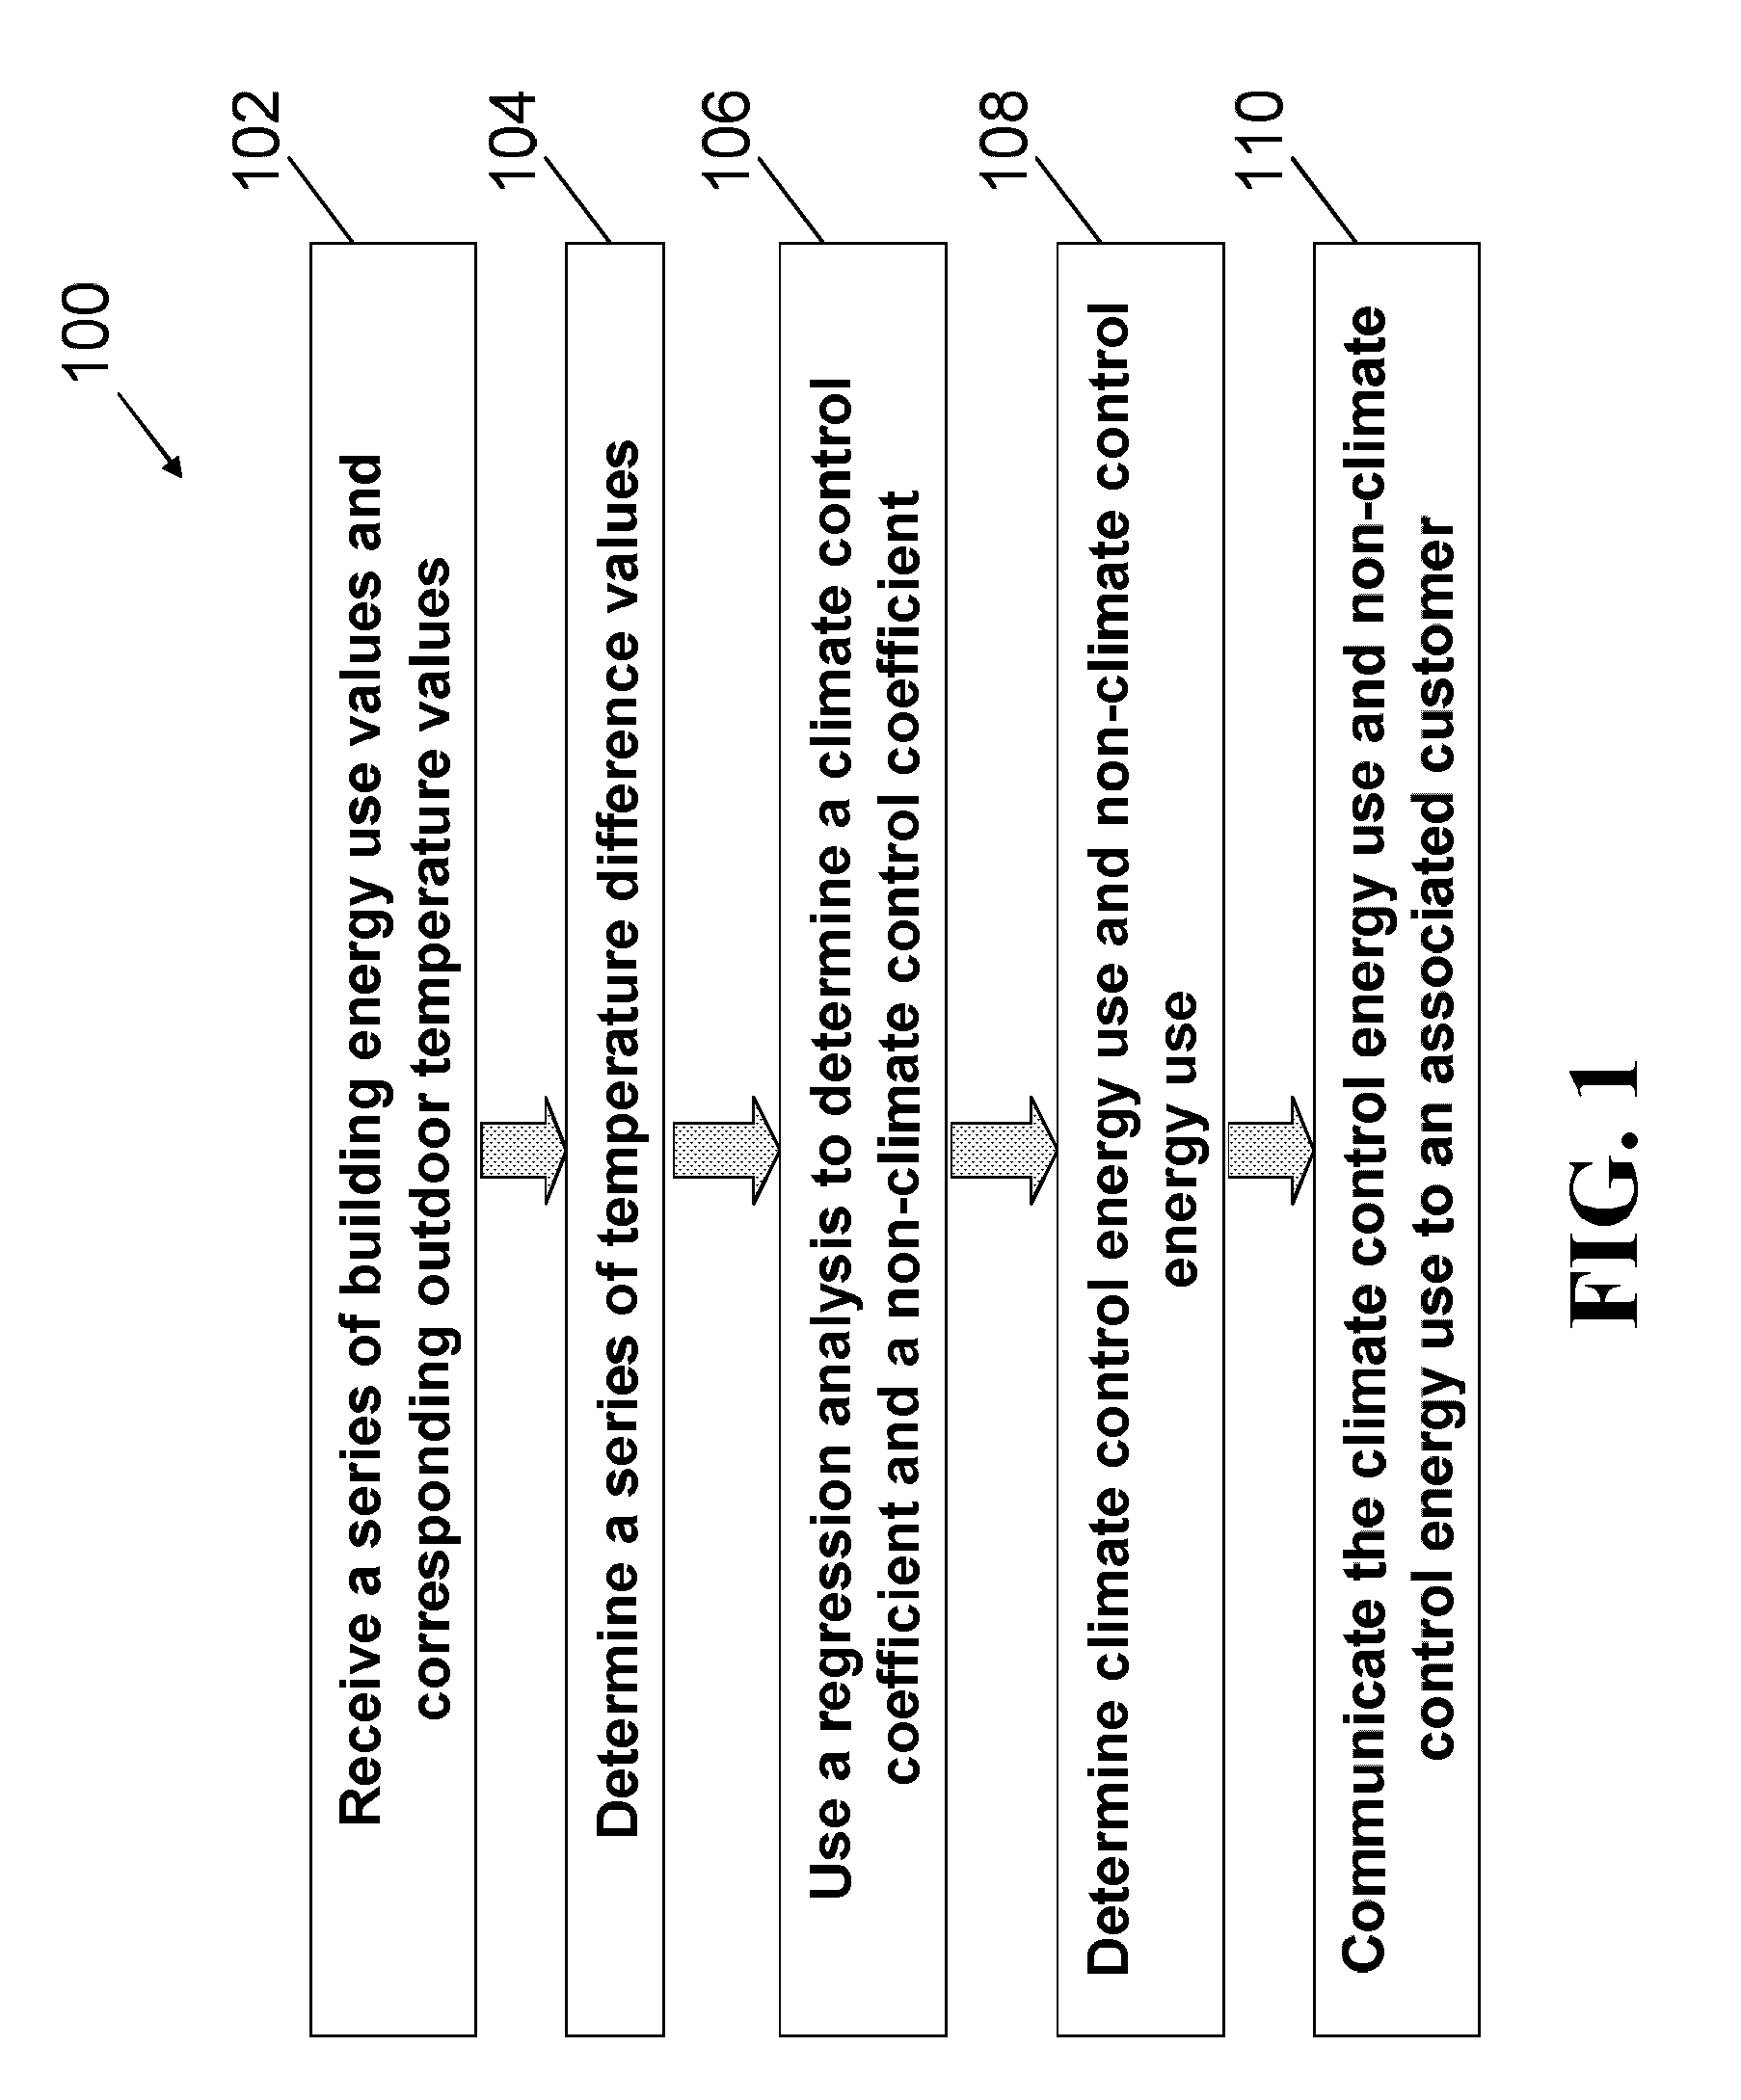 Method and System for Disaggregating Heating and Cooling Energy Use From Other Building Energy Use